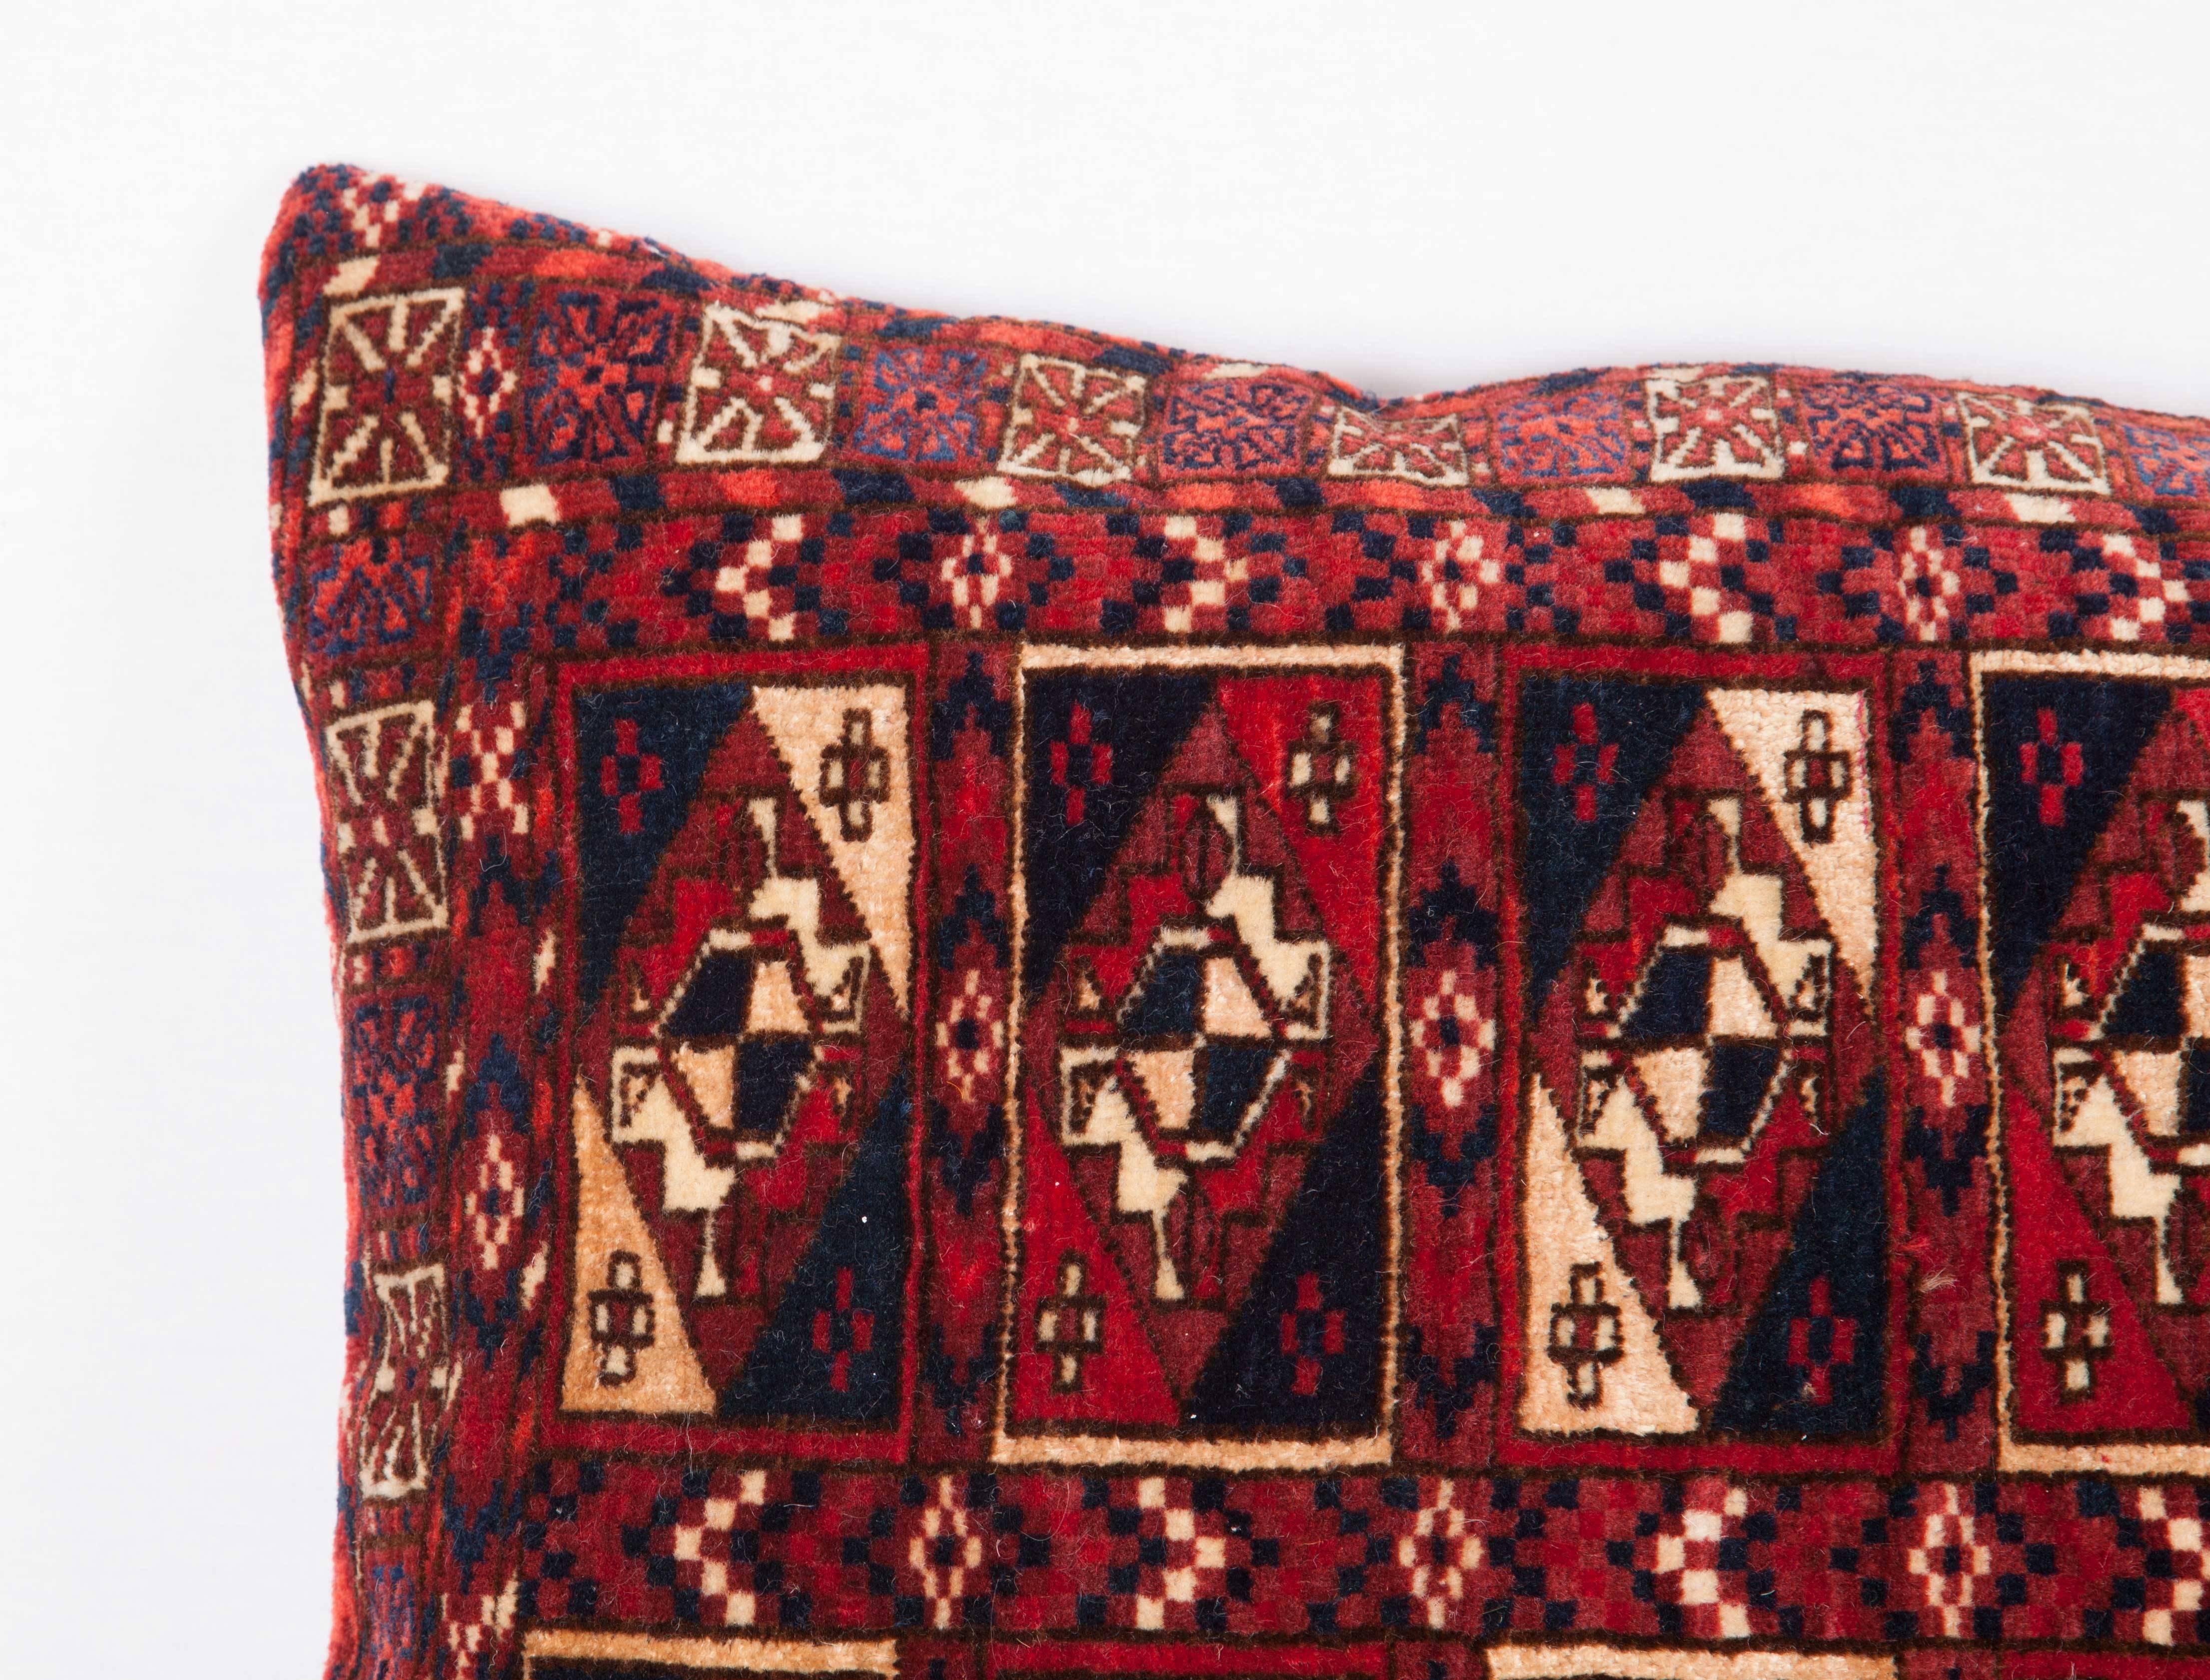 Hand-Woven Antique Pillow with Velvet like Texture Made Out of a Turkmen Bag For Sale